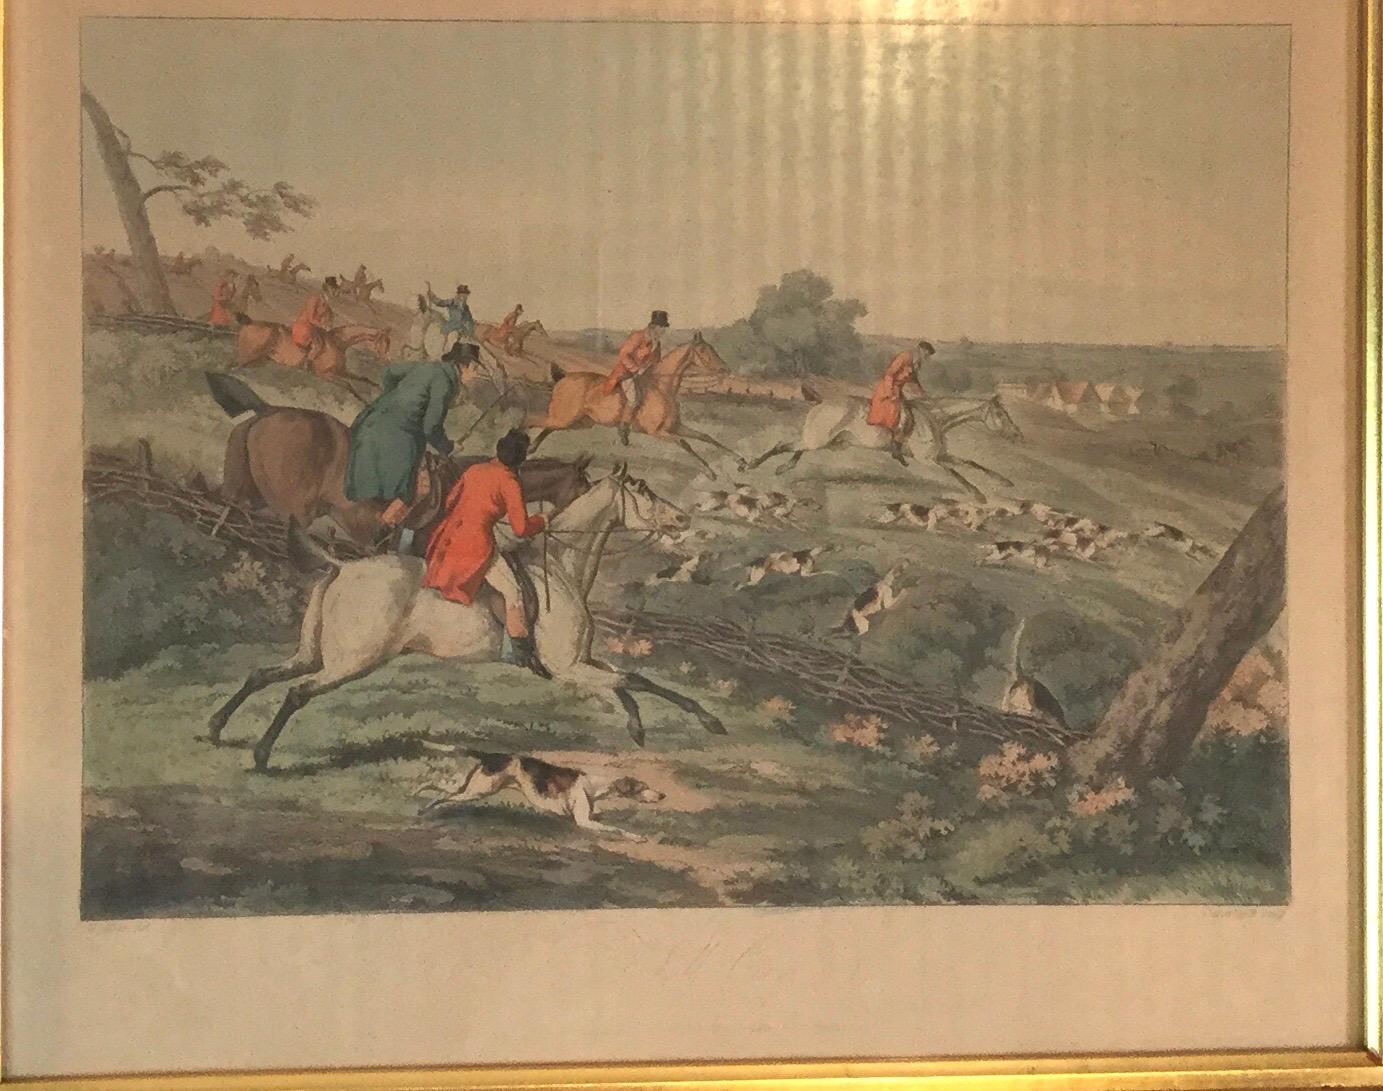 A handsome set of four English hand colored engraved prints in antique medium wood color frames. The set is of English fox hunting scenes from the early 19th century. Dimensions: 17.5